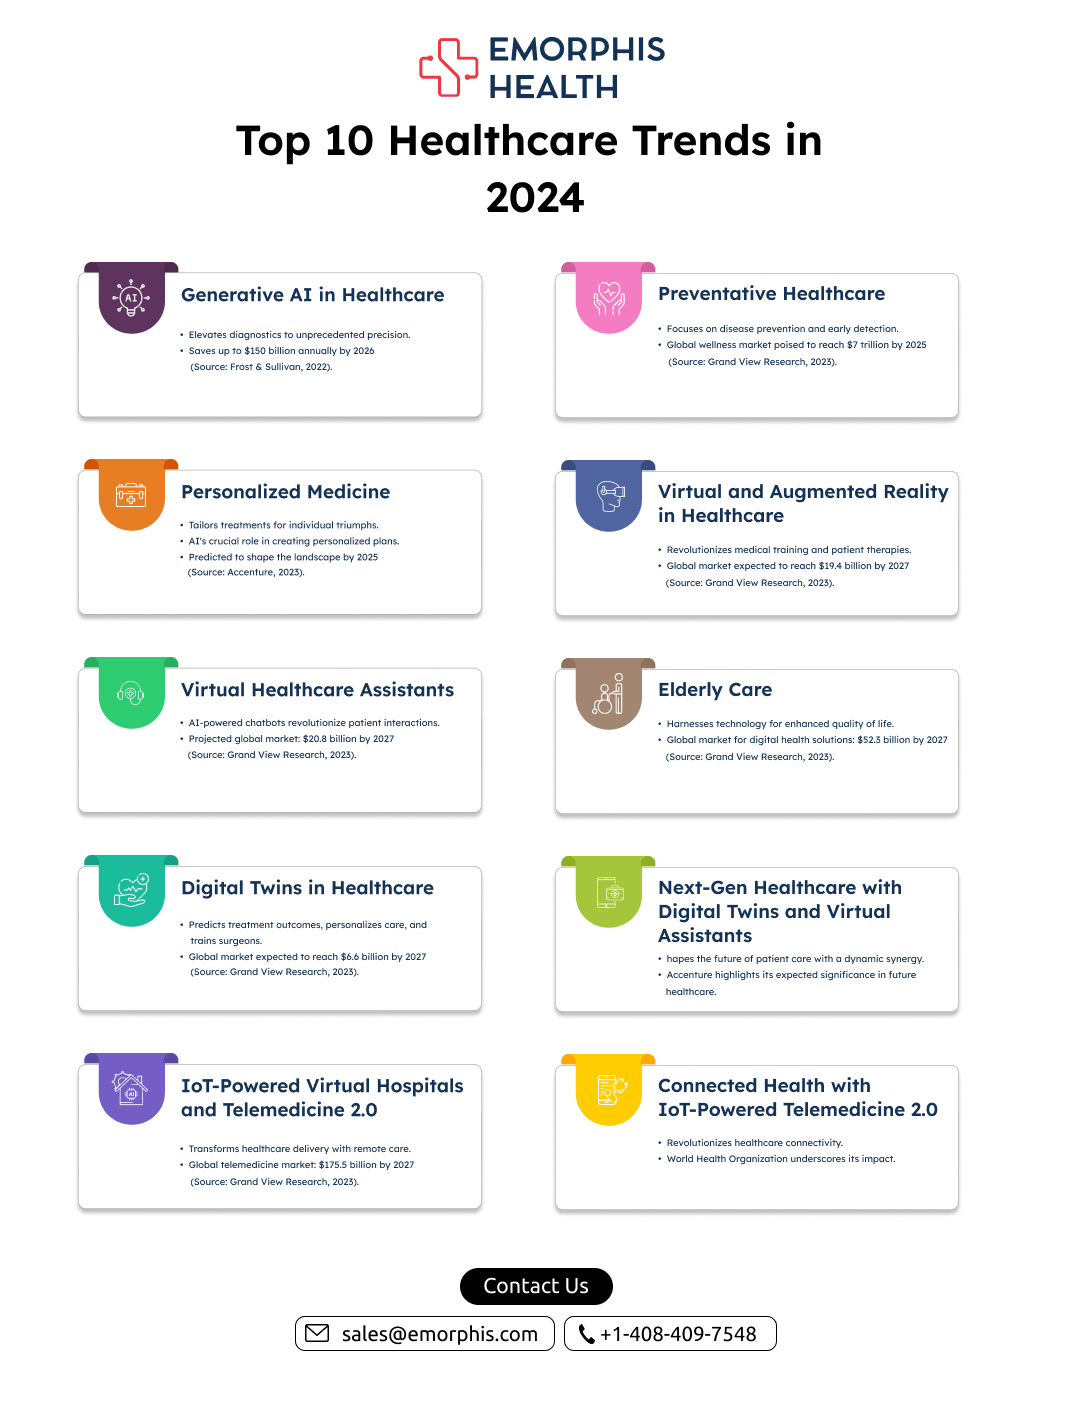 Top 10 Healthcare Trends Reshaping the Landscape in 2024